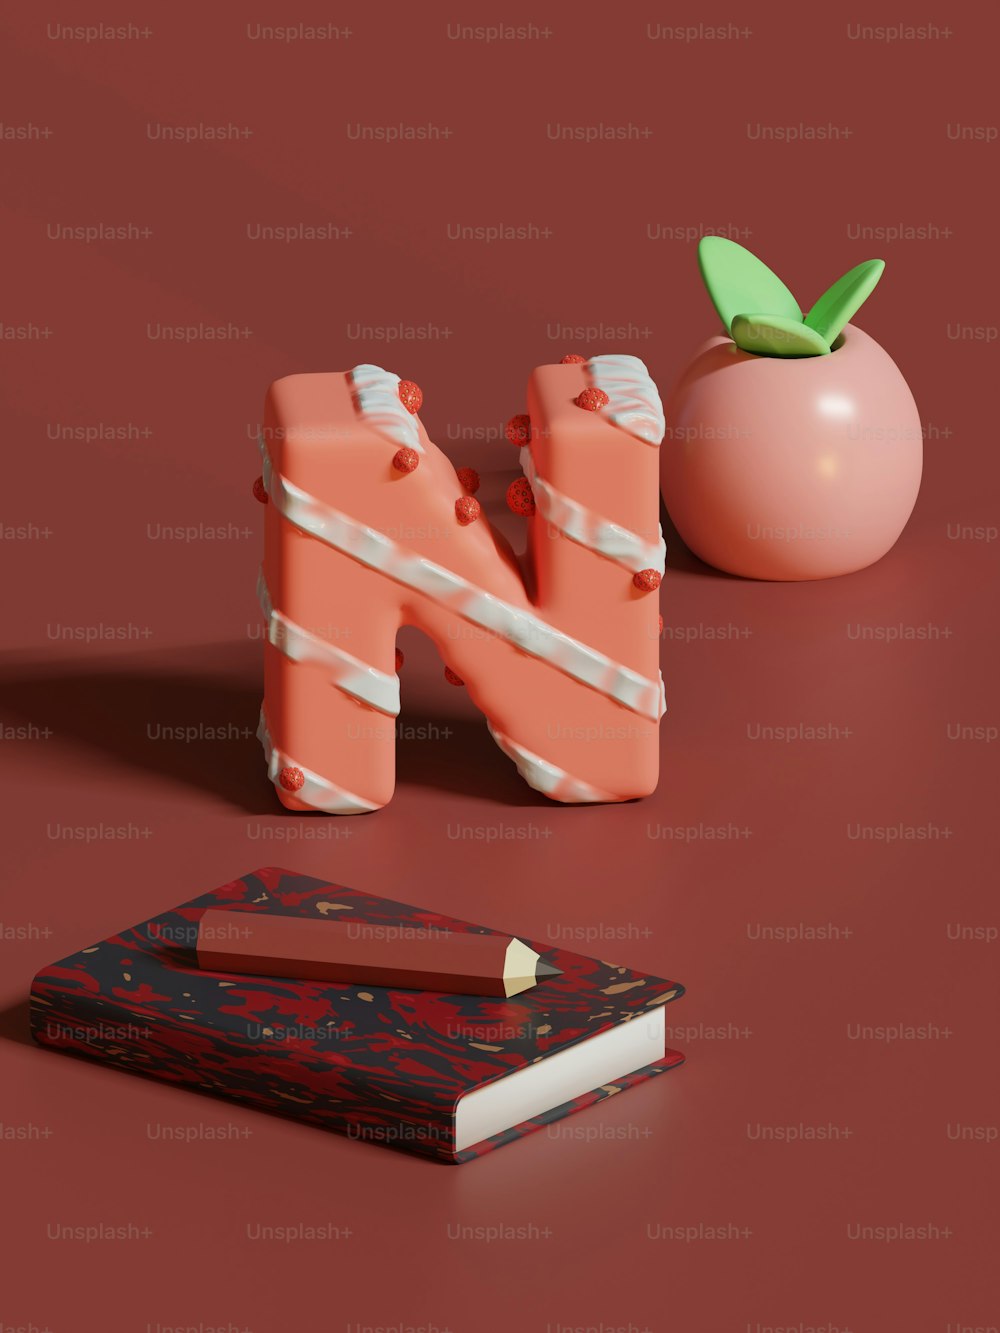 a book, pencil, and apple on a red surface